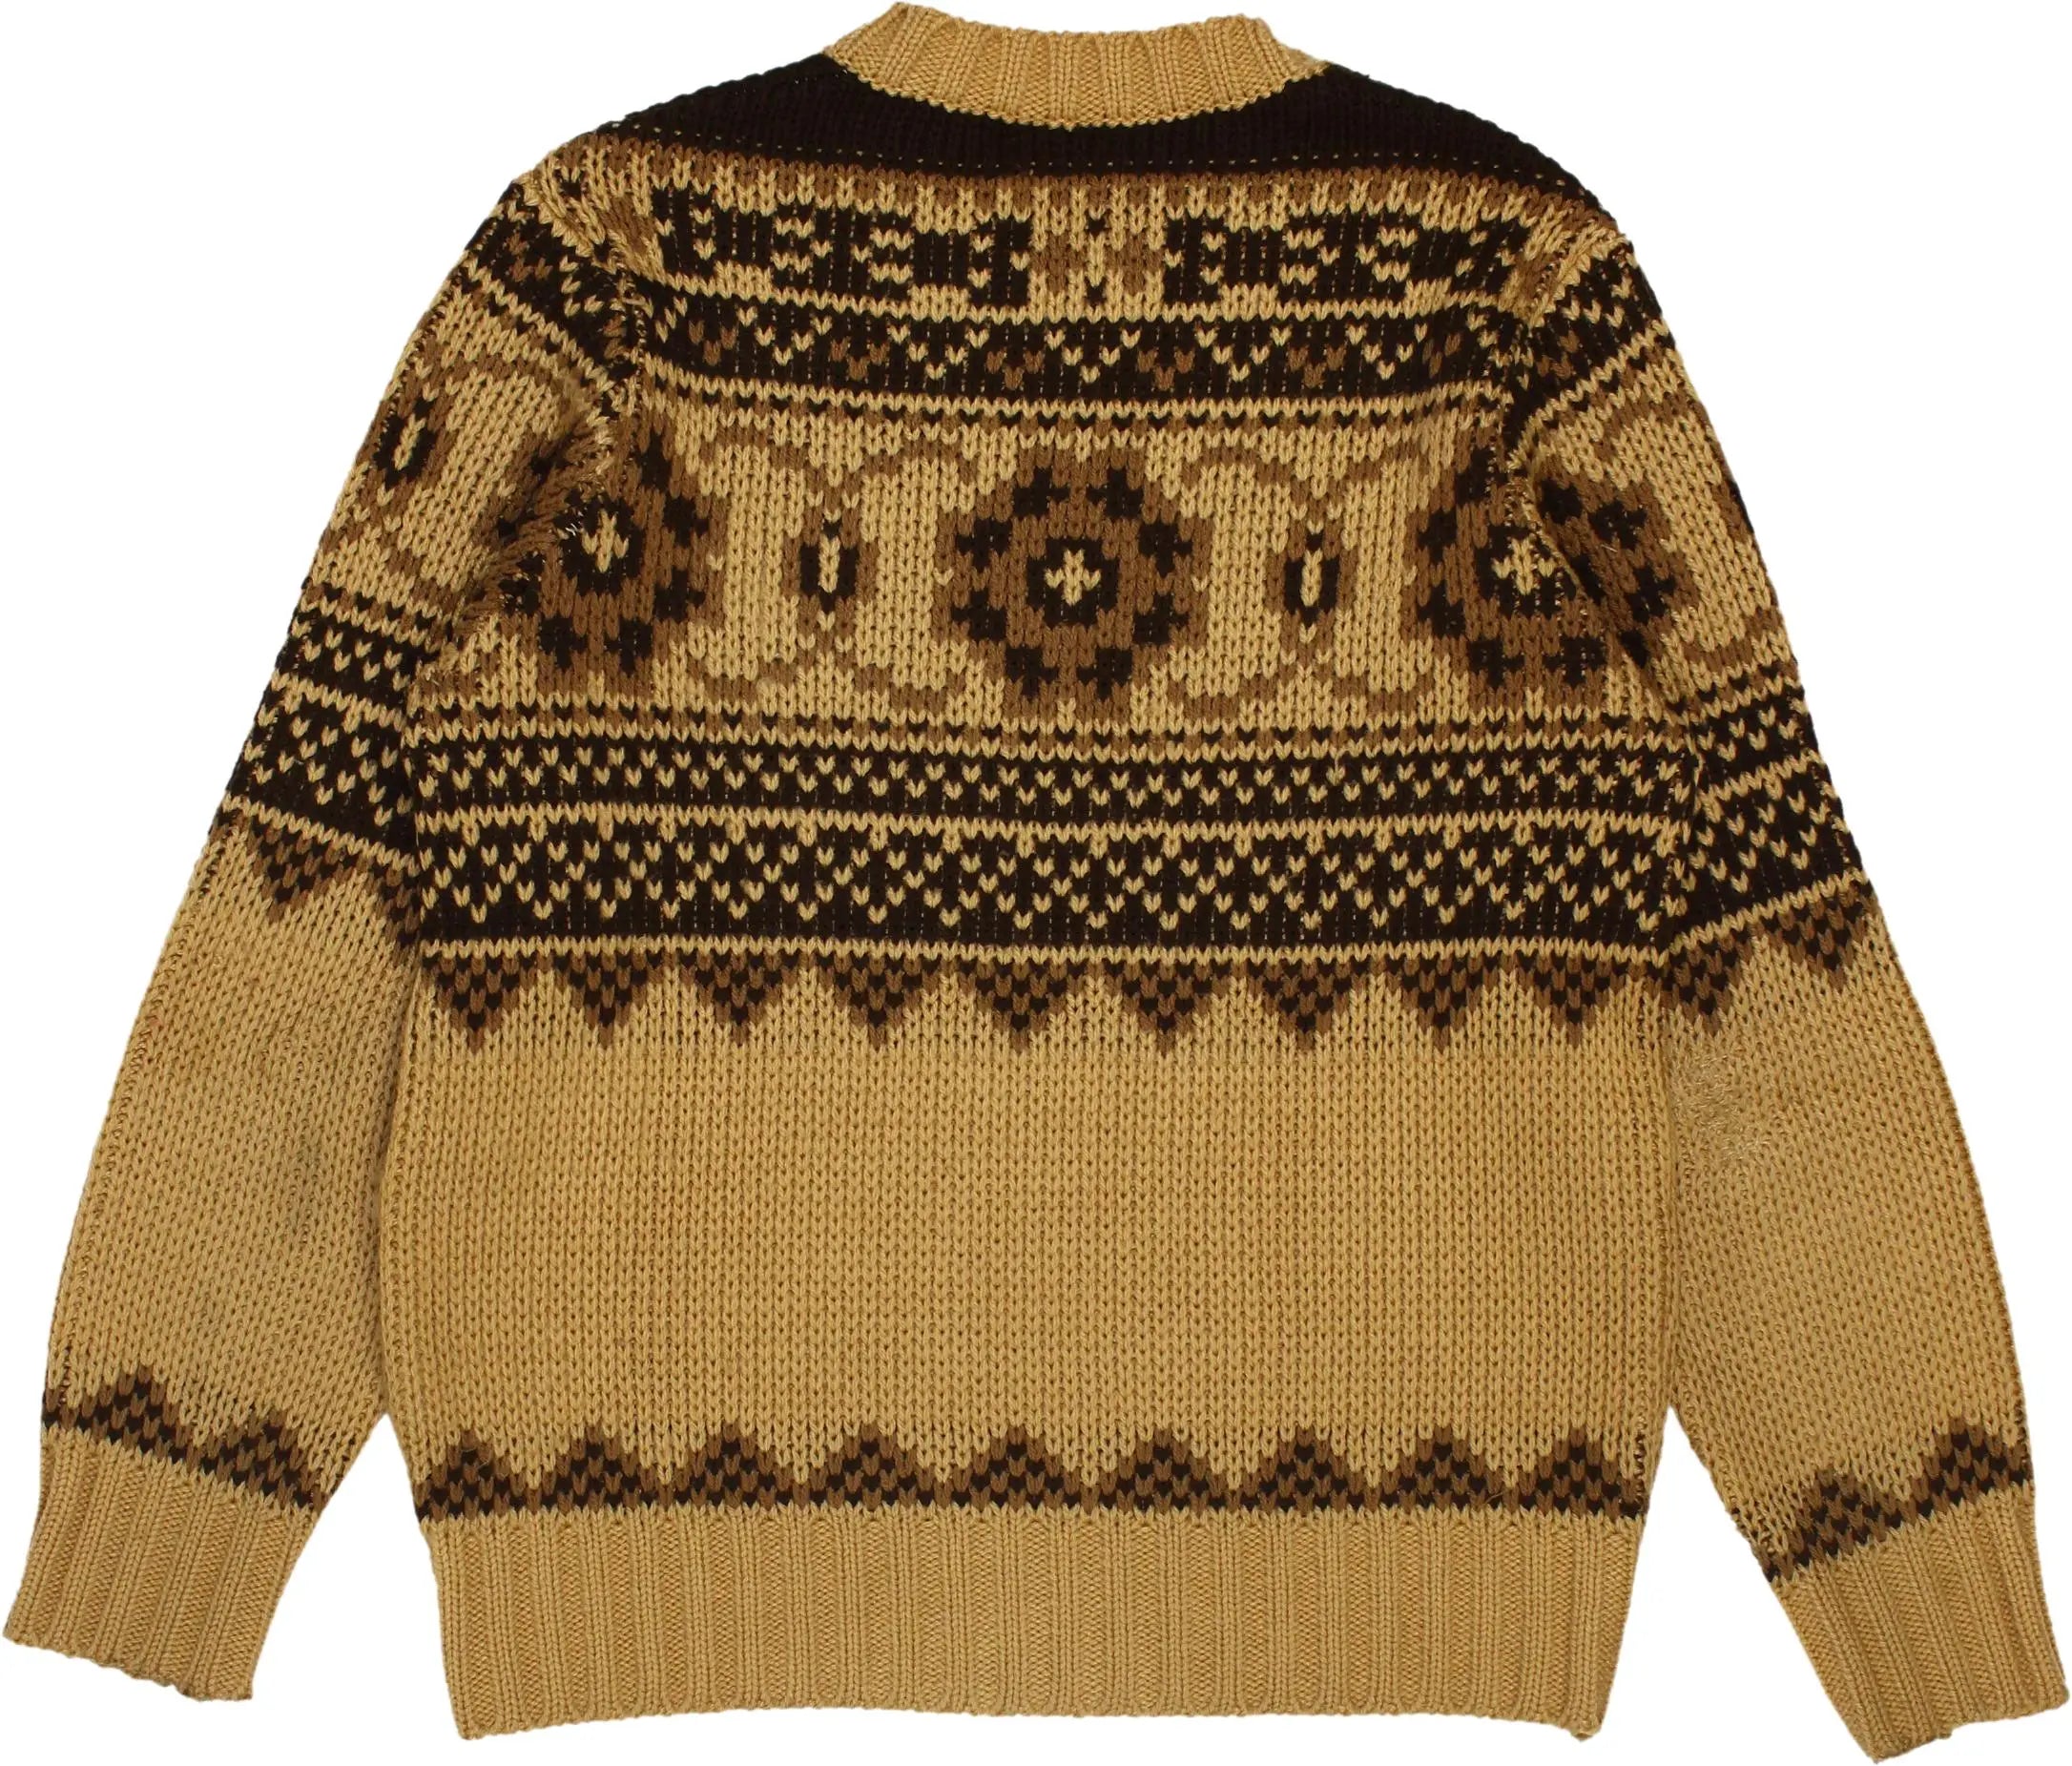 Unknown - Knitted Jumper- ThriftTale.com - Vintage and second handclothing